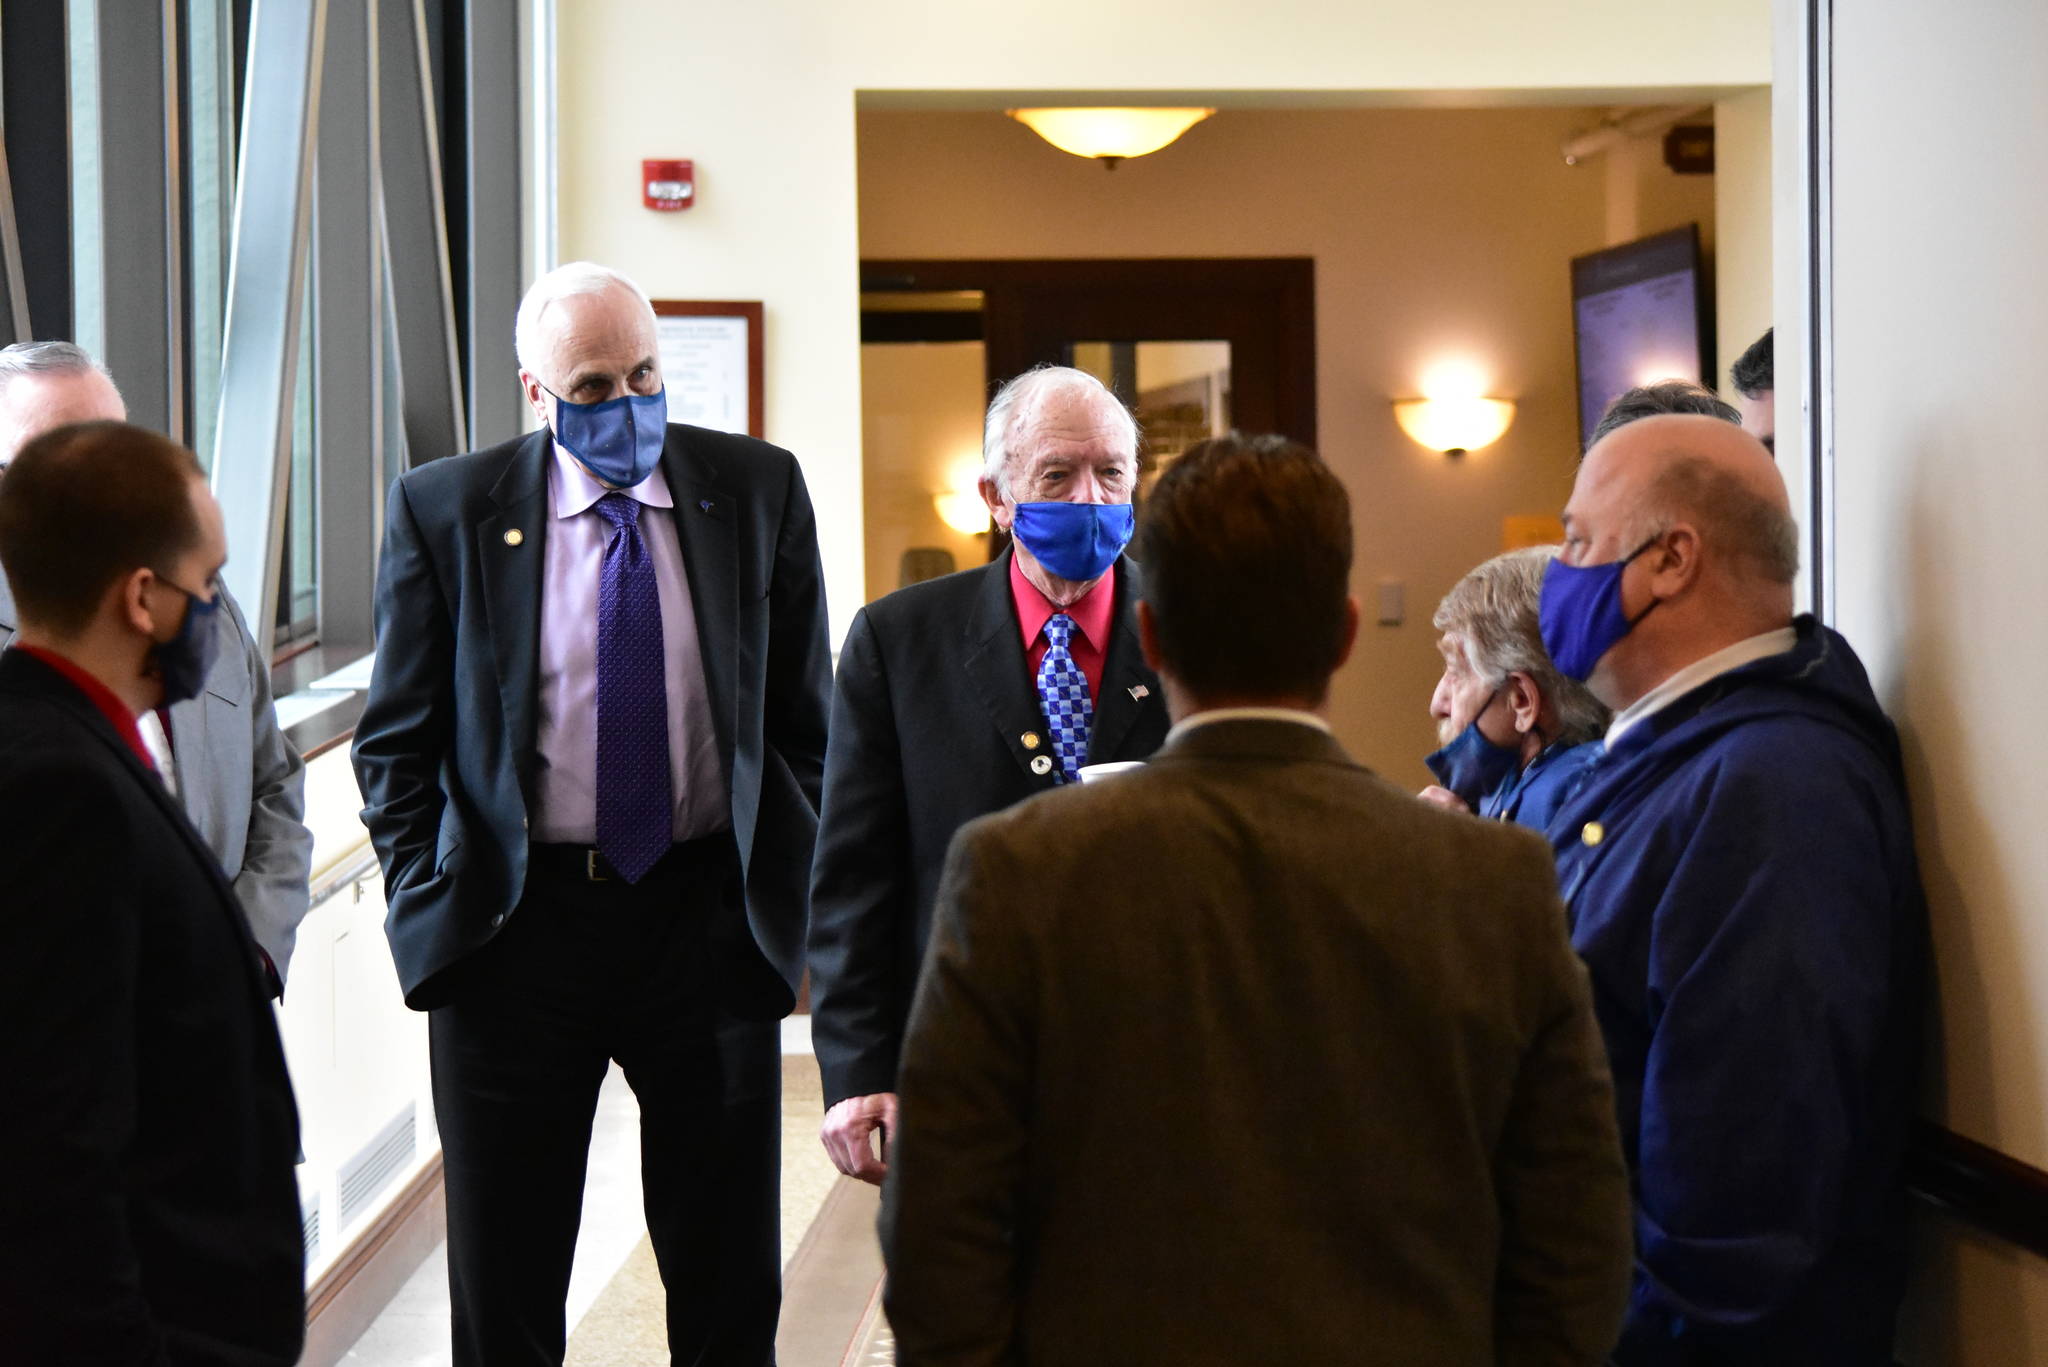 Masked House Republicans meet in the hallway of the Alaska State Capitol on Friday, March 19, 2021, to discuss Rep. Chris Kurka’s refusal to remove a controversial mask. (Peter Segall / Juneau Empire)